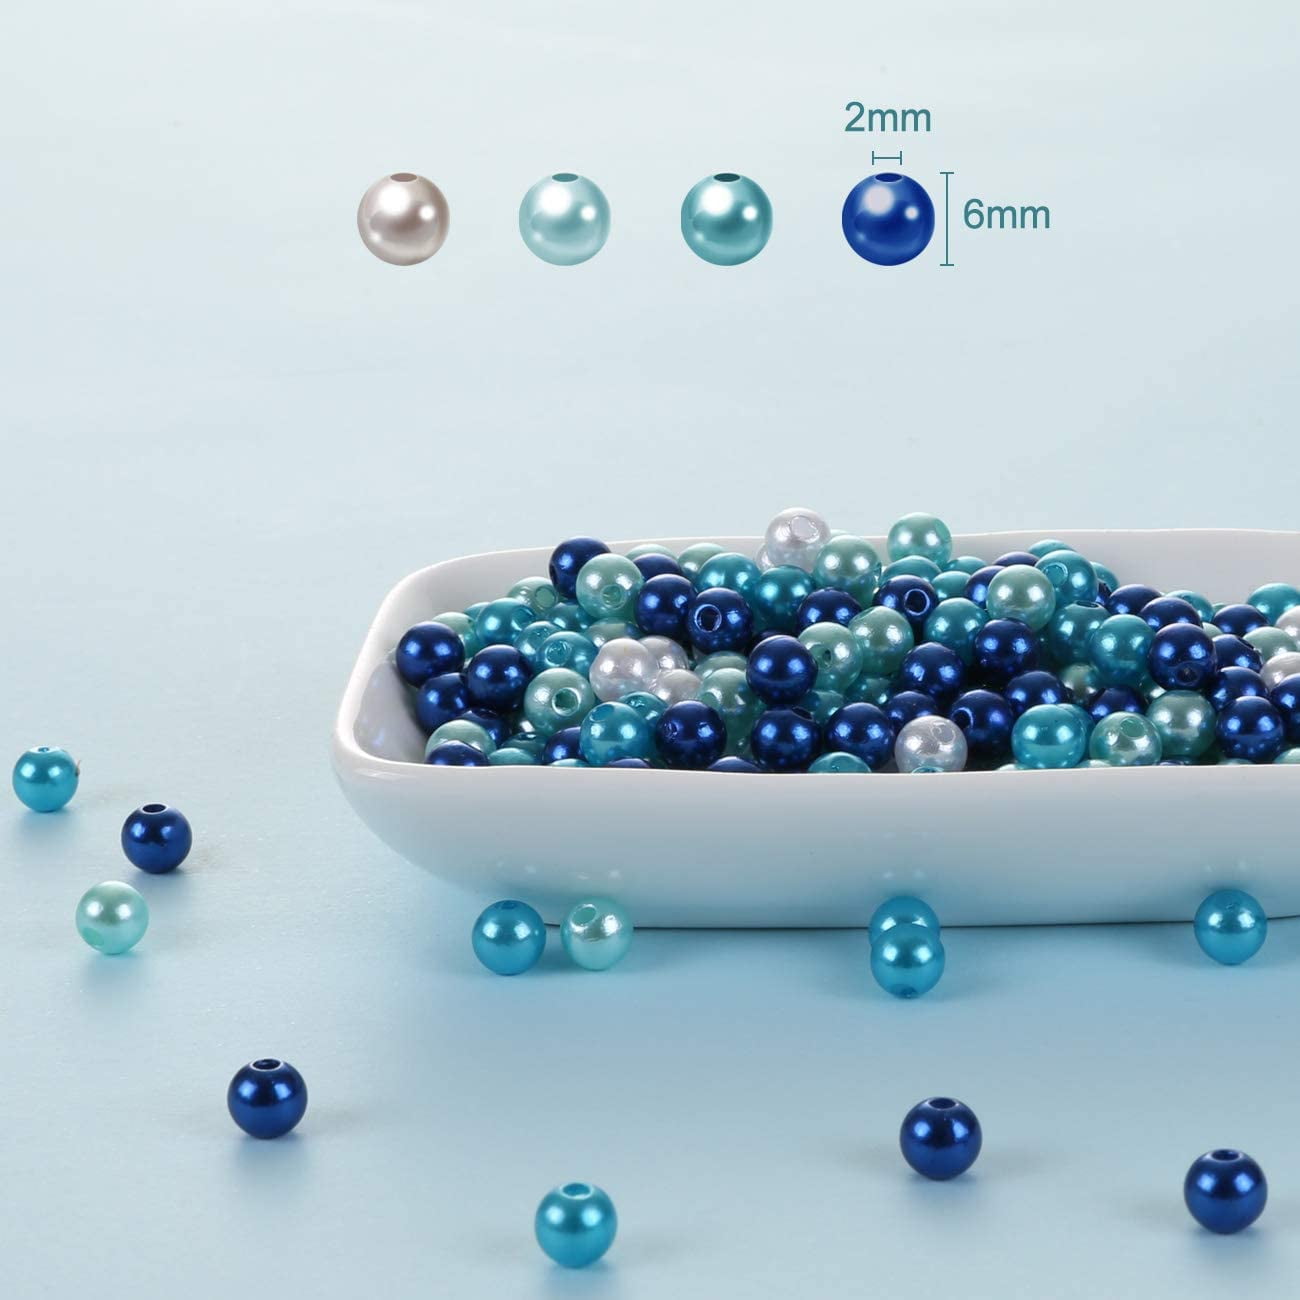 3420pcs Mixed Sizes White Blue Half Beads For Crafts Tumblers Loose Plastic  Acrylic Bead Pearl Phone Decoration 2/4/6/8/10mm - AliExpress